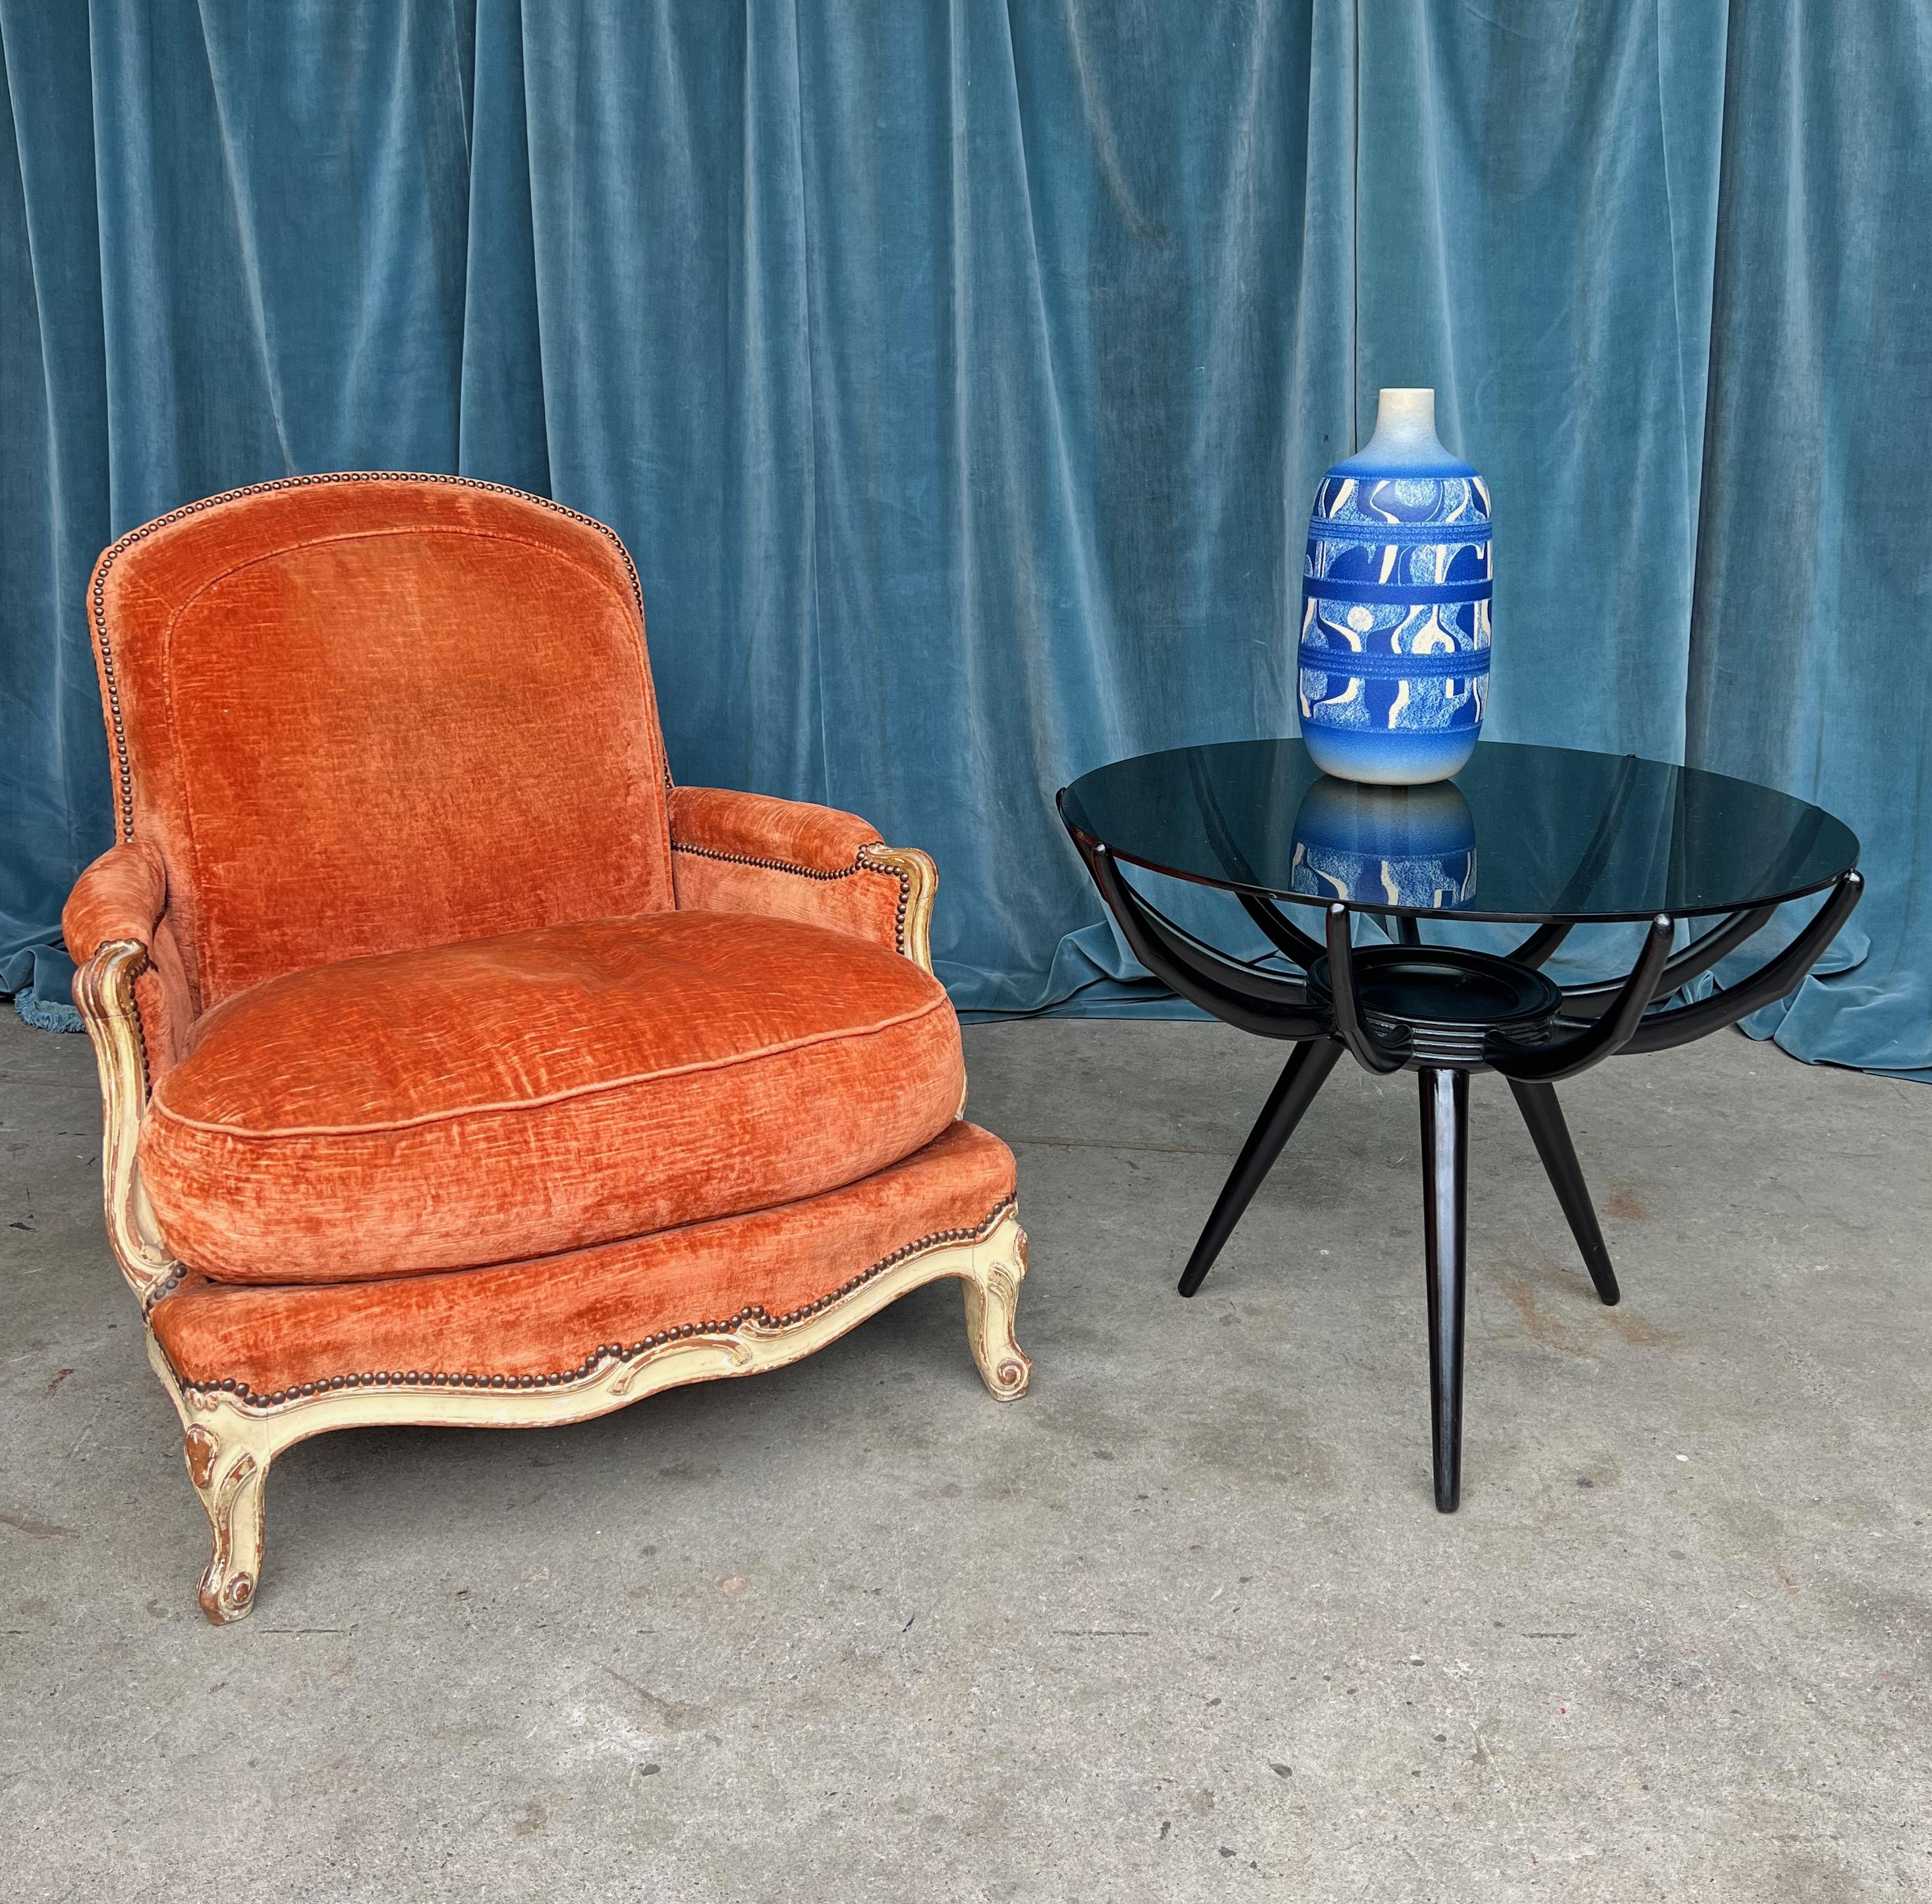 This Italian 1960s modern round end table presents a chic blend of black and grey, with a sleek glass top resting on a tripod base. Although the piece is attributed to Carlo De Carli (1910-1999), it bears no attribution marks. De Carli was not just